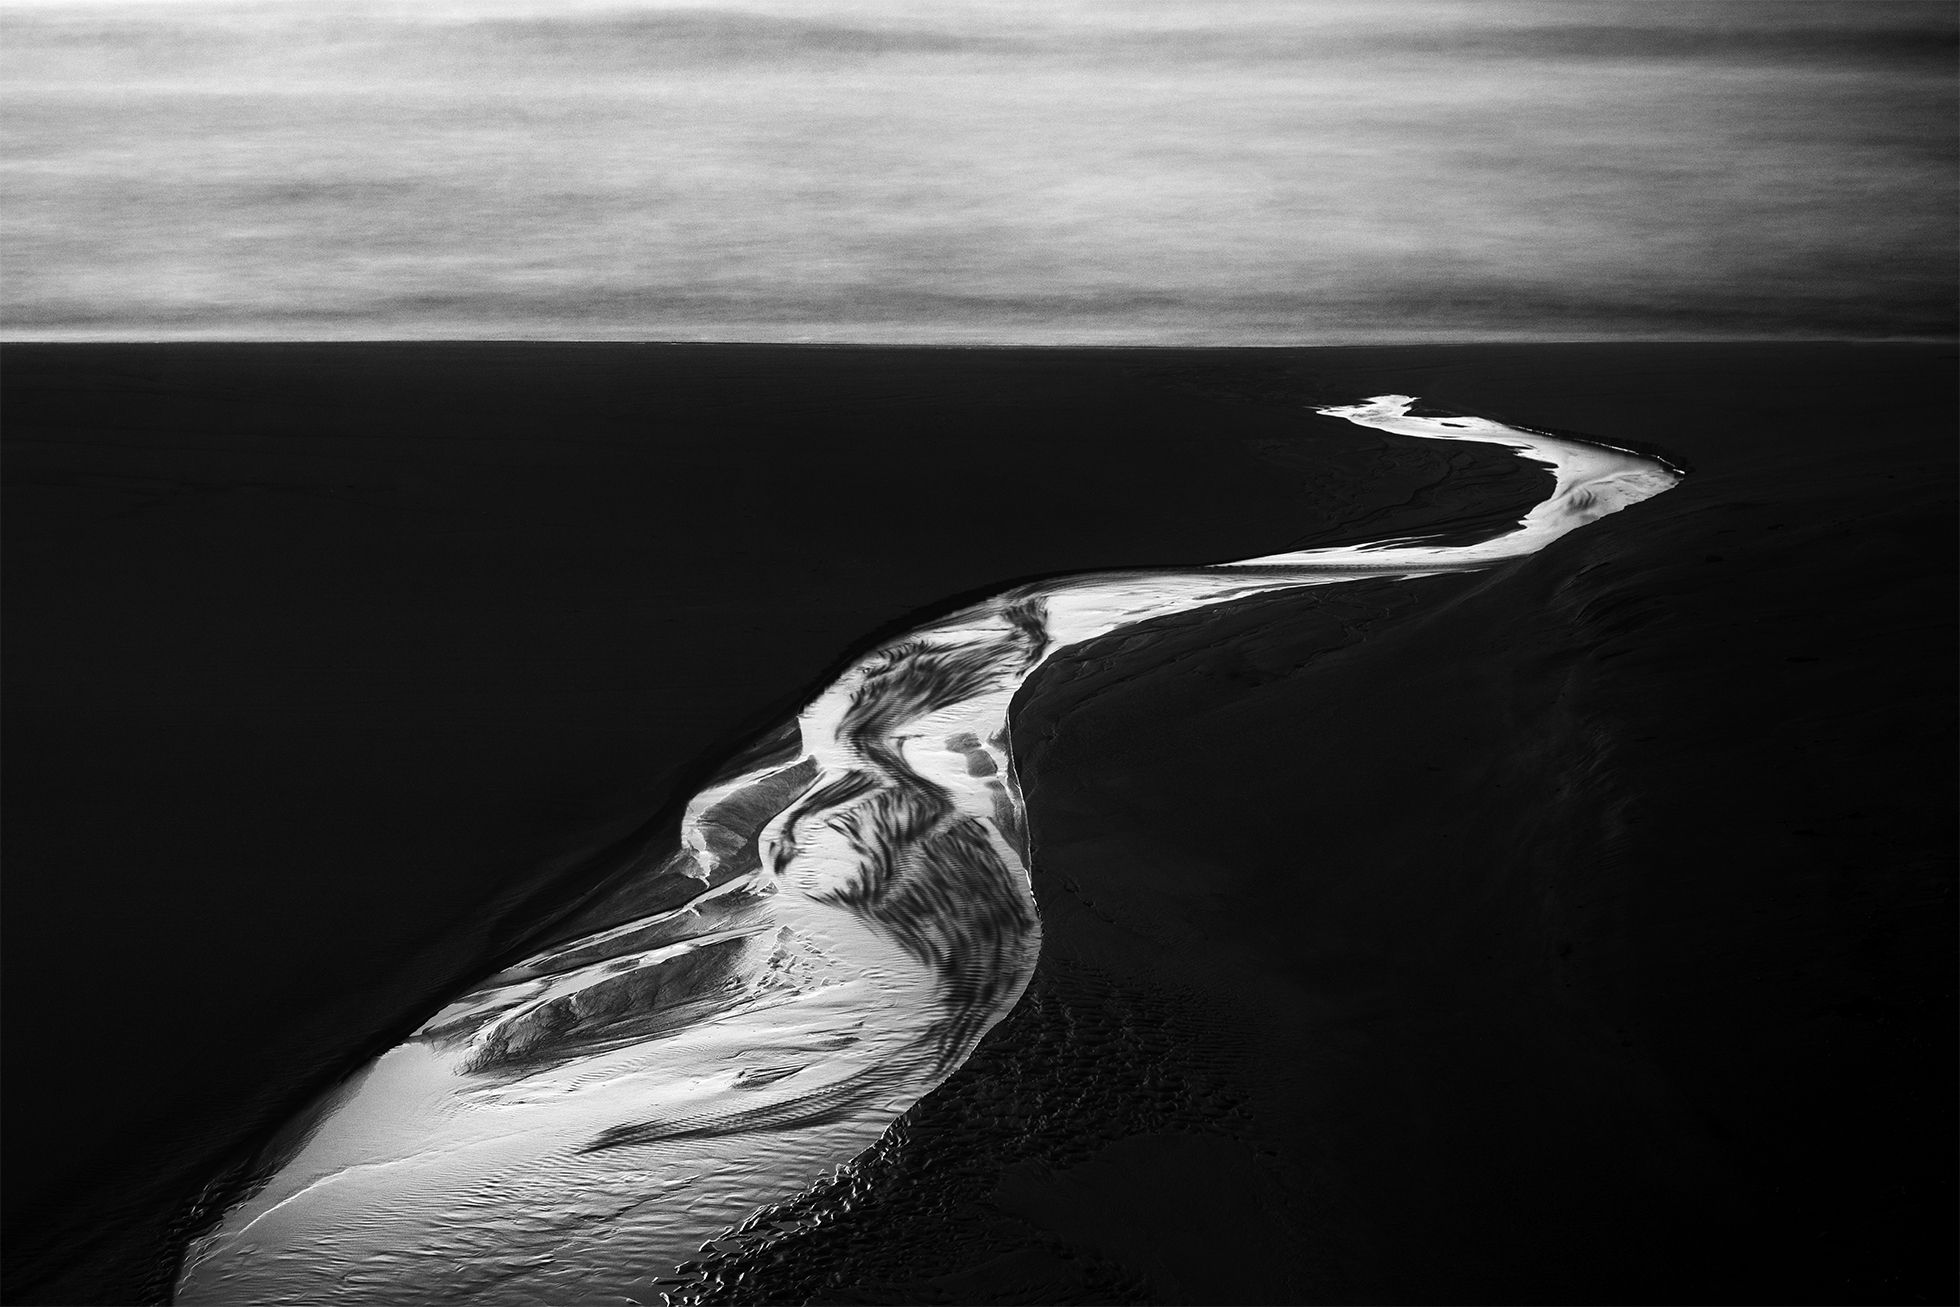 A curving river flowing into the horizon. The water shines and shows movement within the dark landscape on both sides.